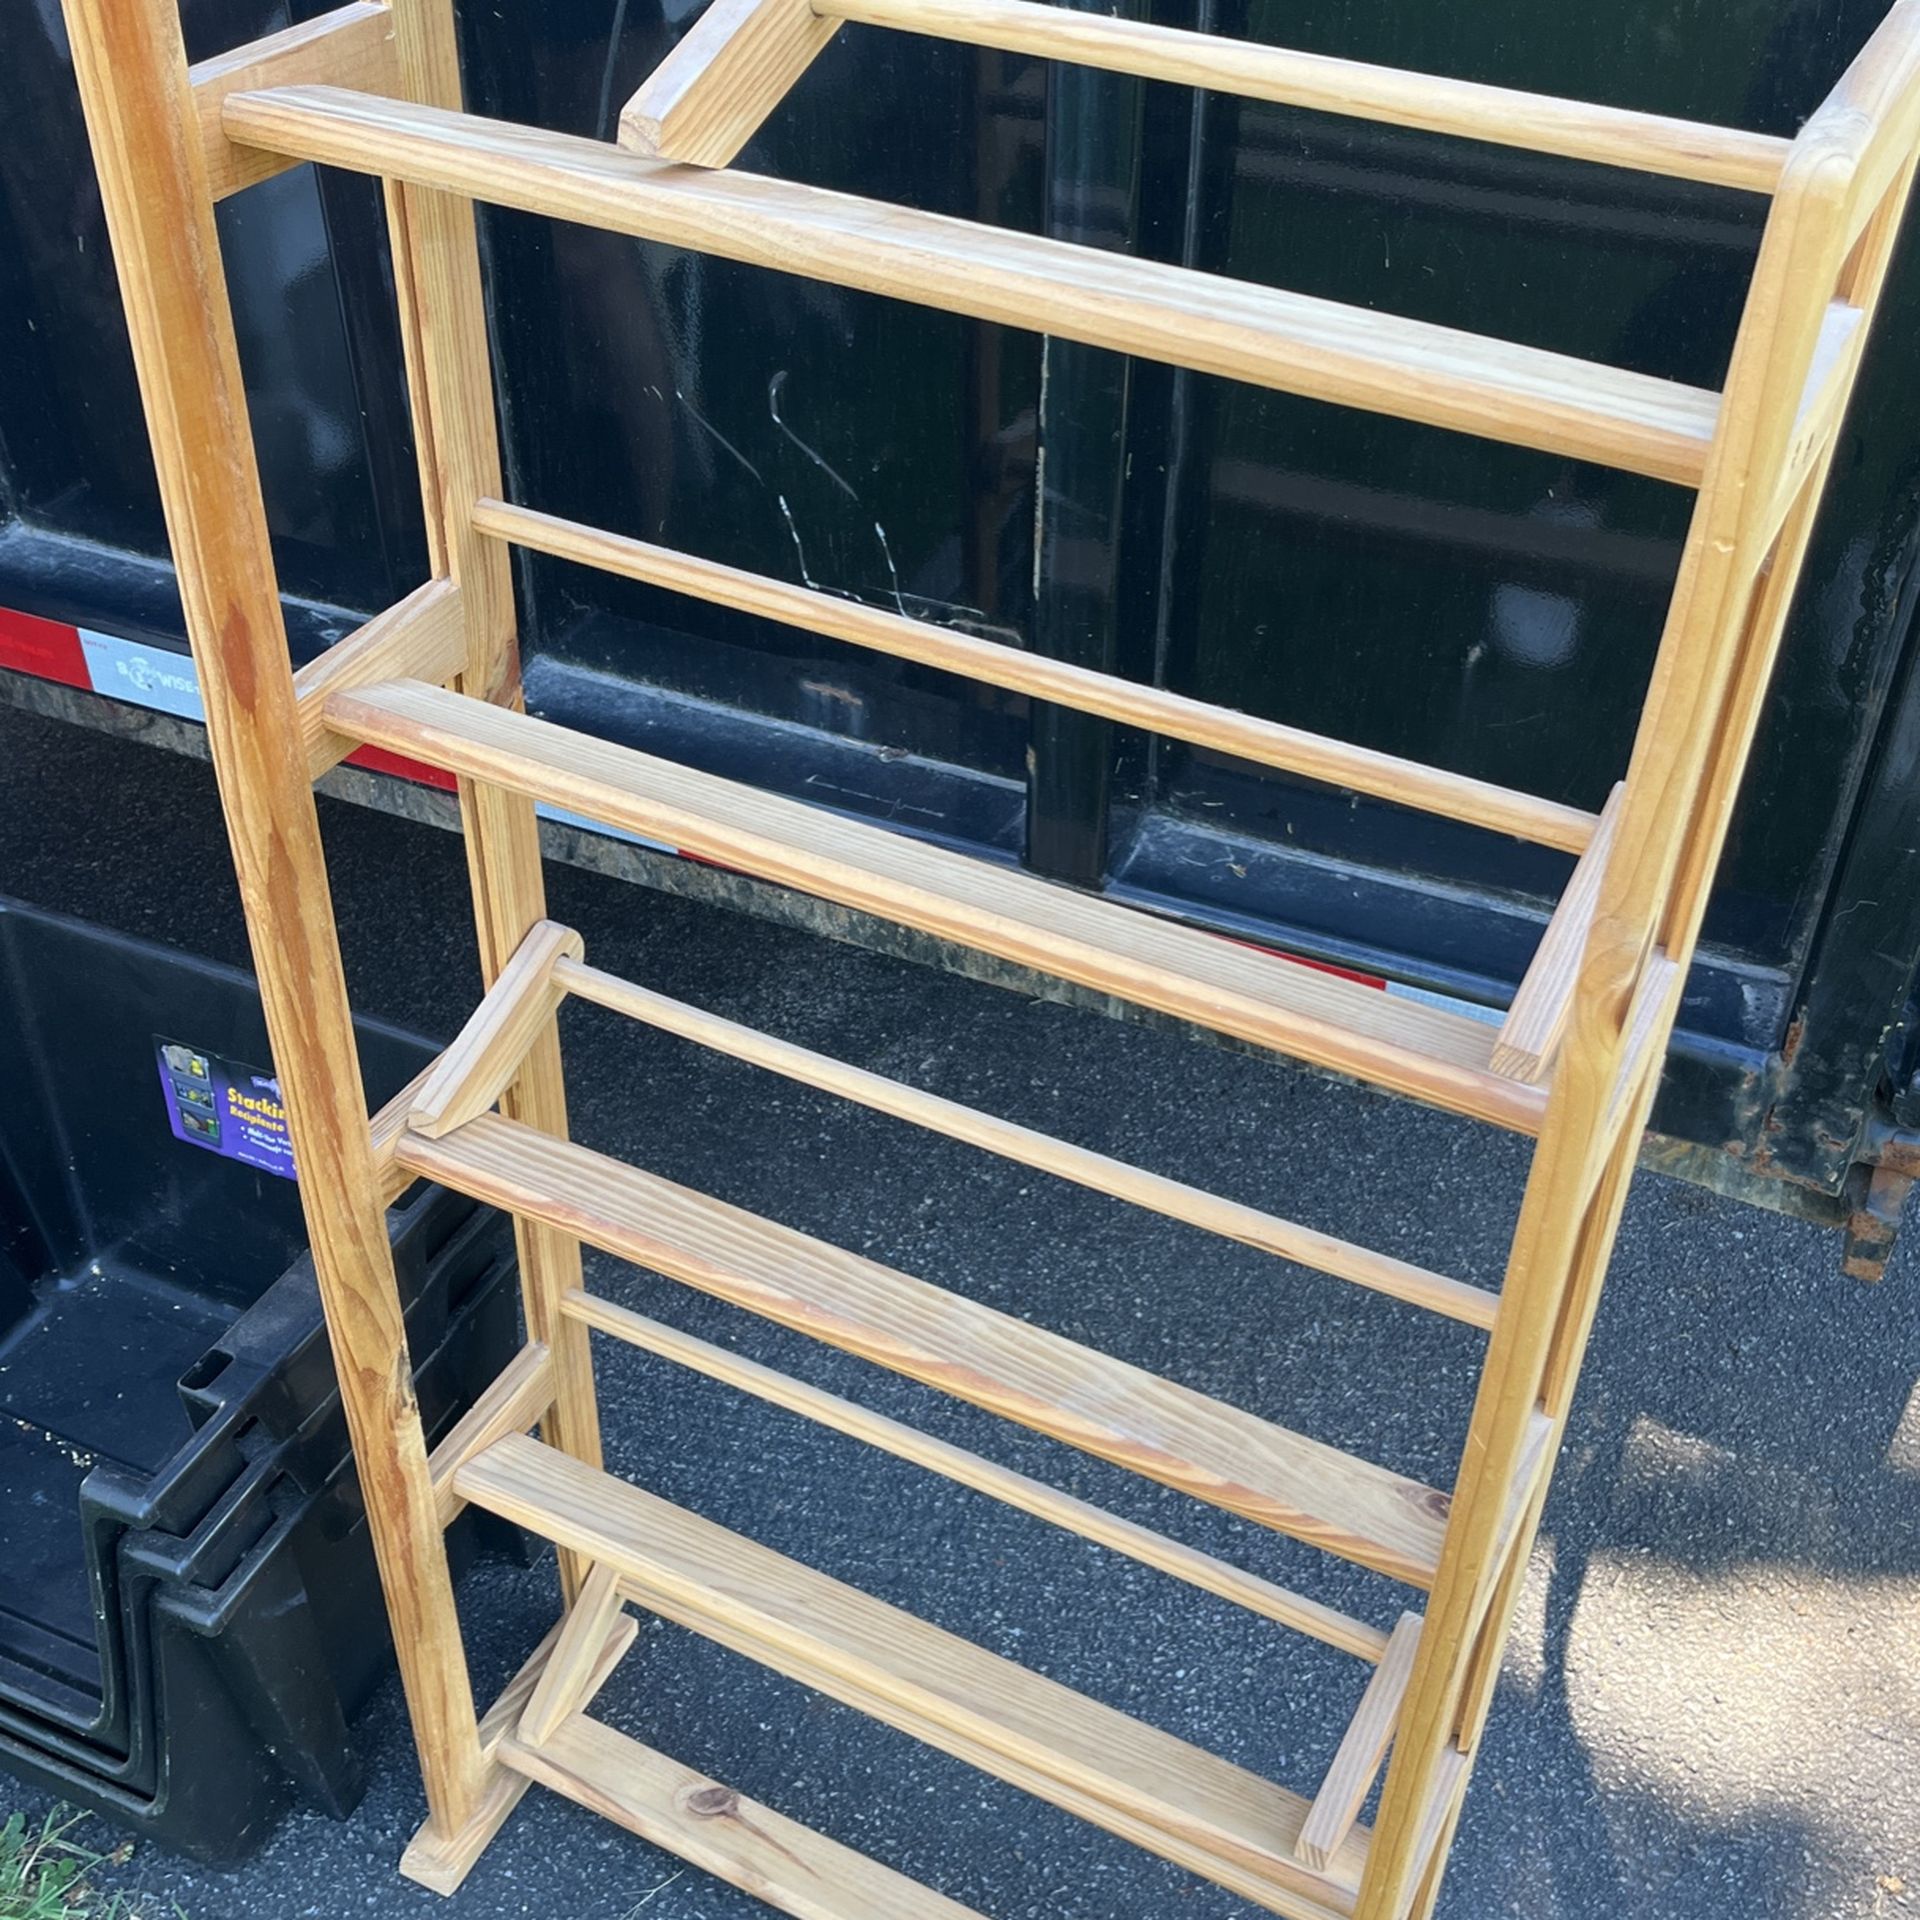 Wooden Shoe Rack Moving Everything Must Go!